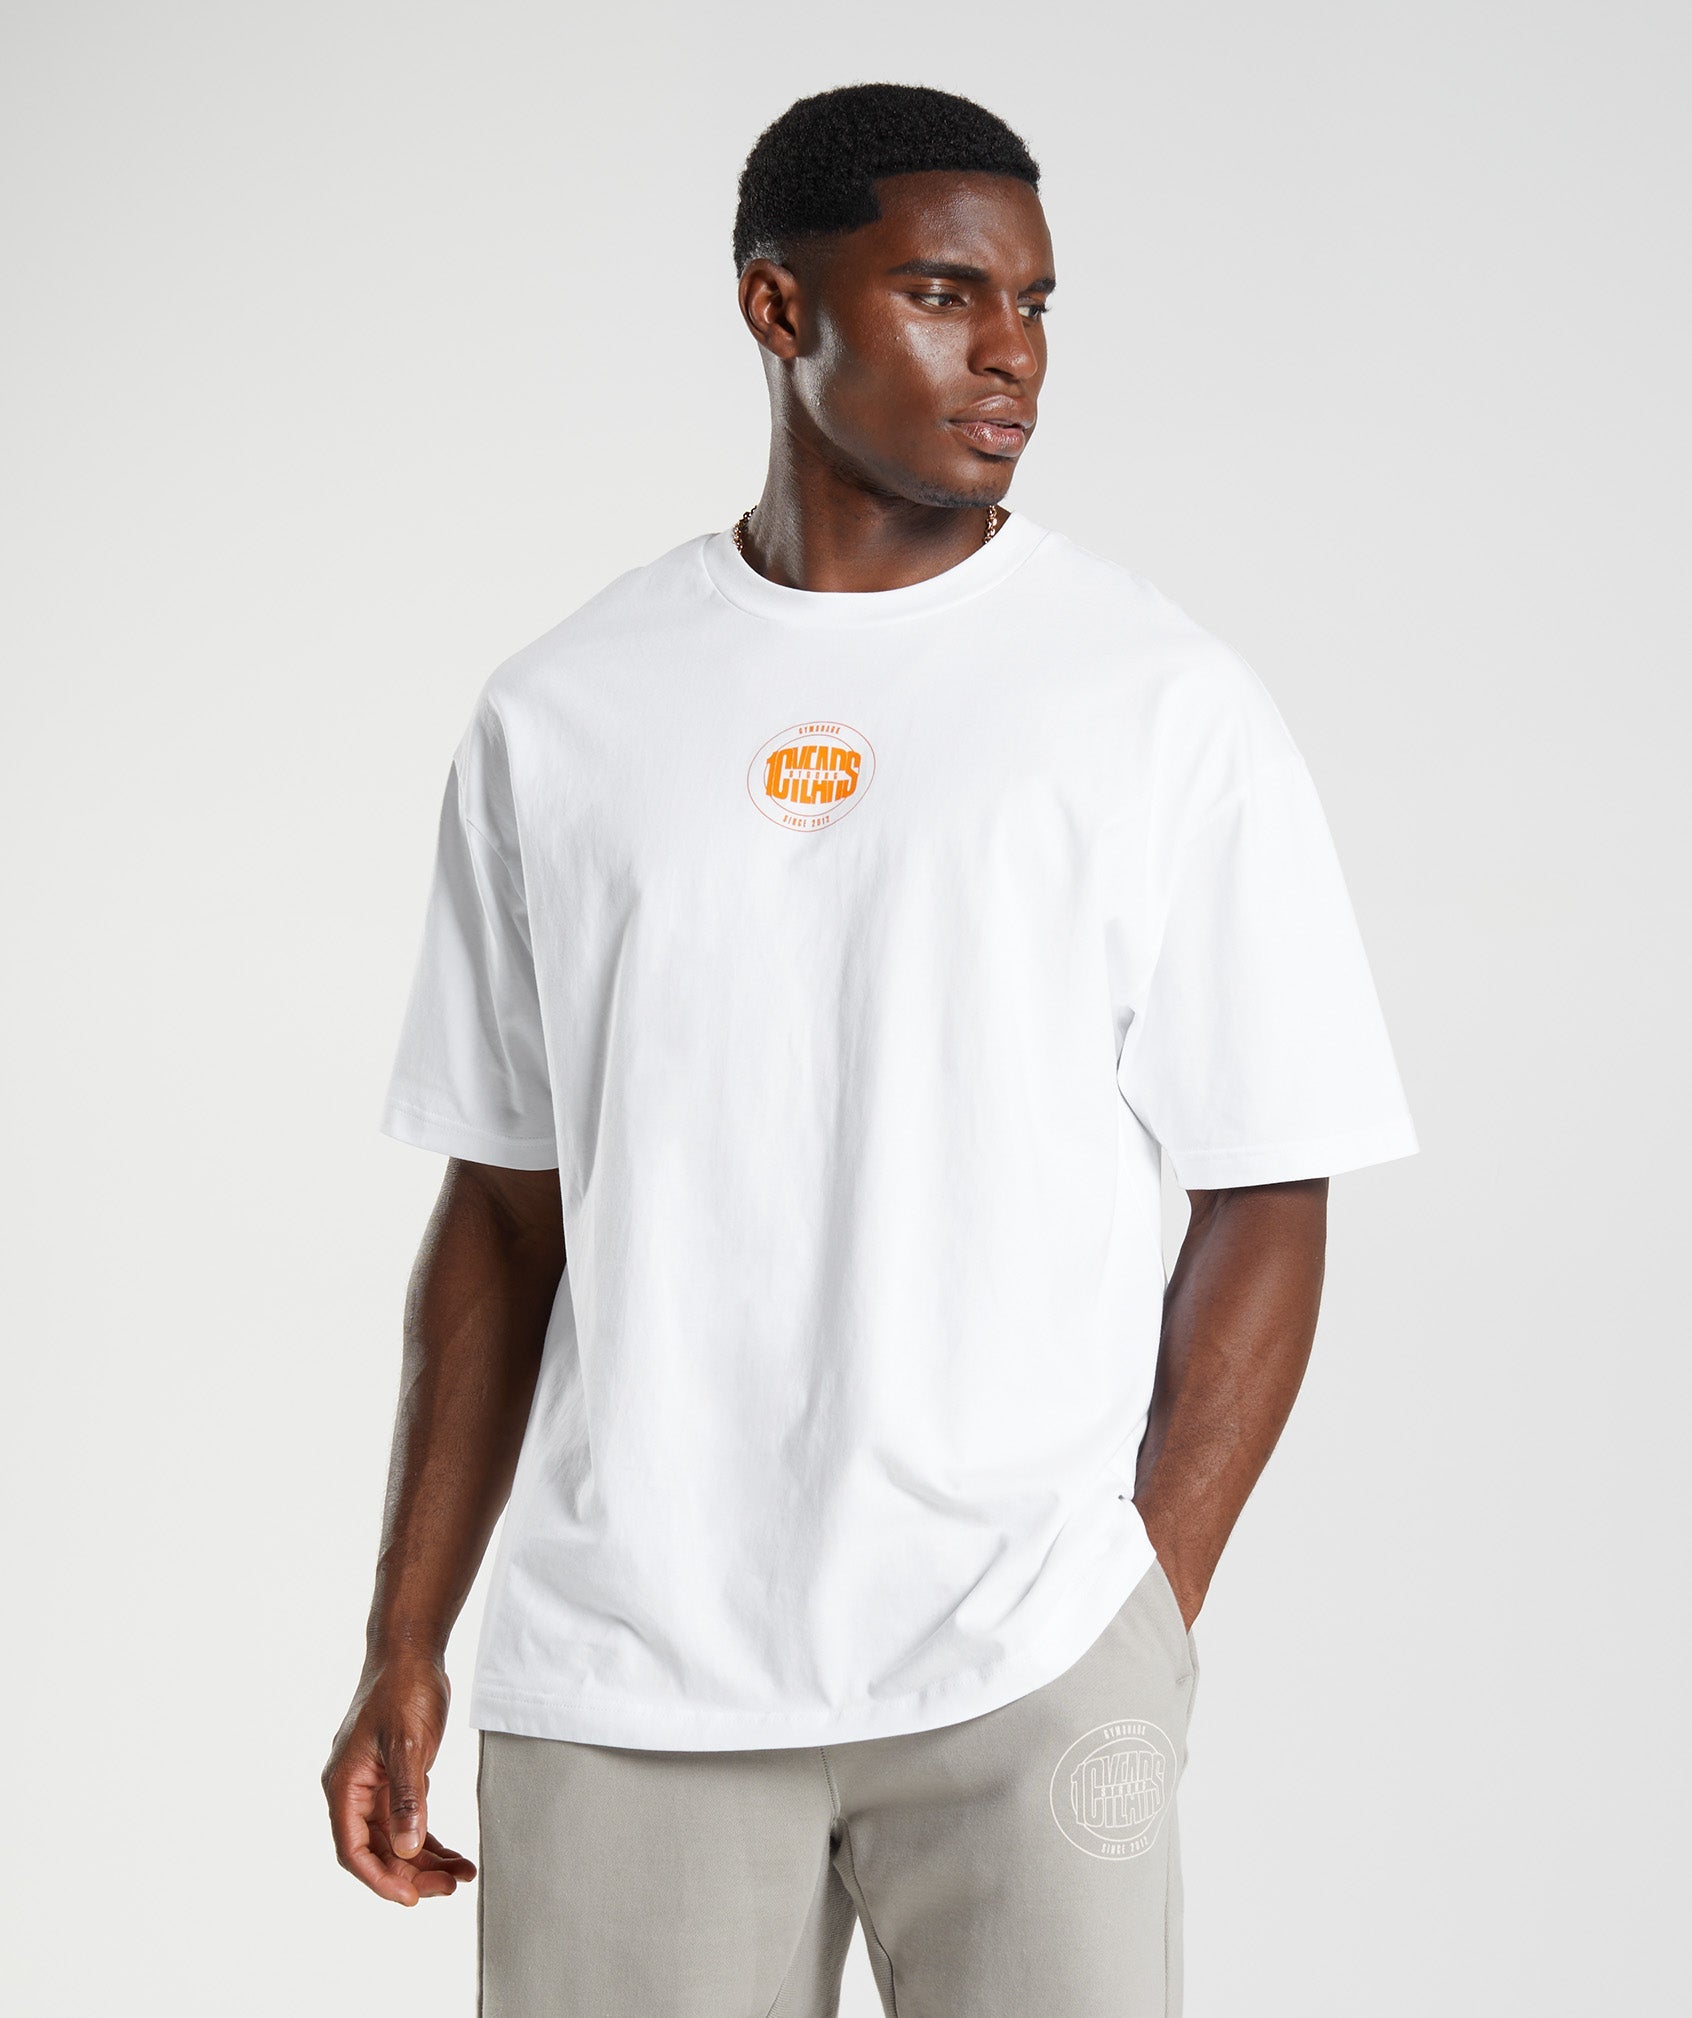 GS10 Year Oversized T-Shirt in White